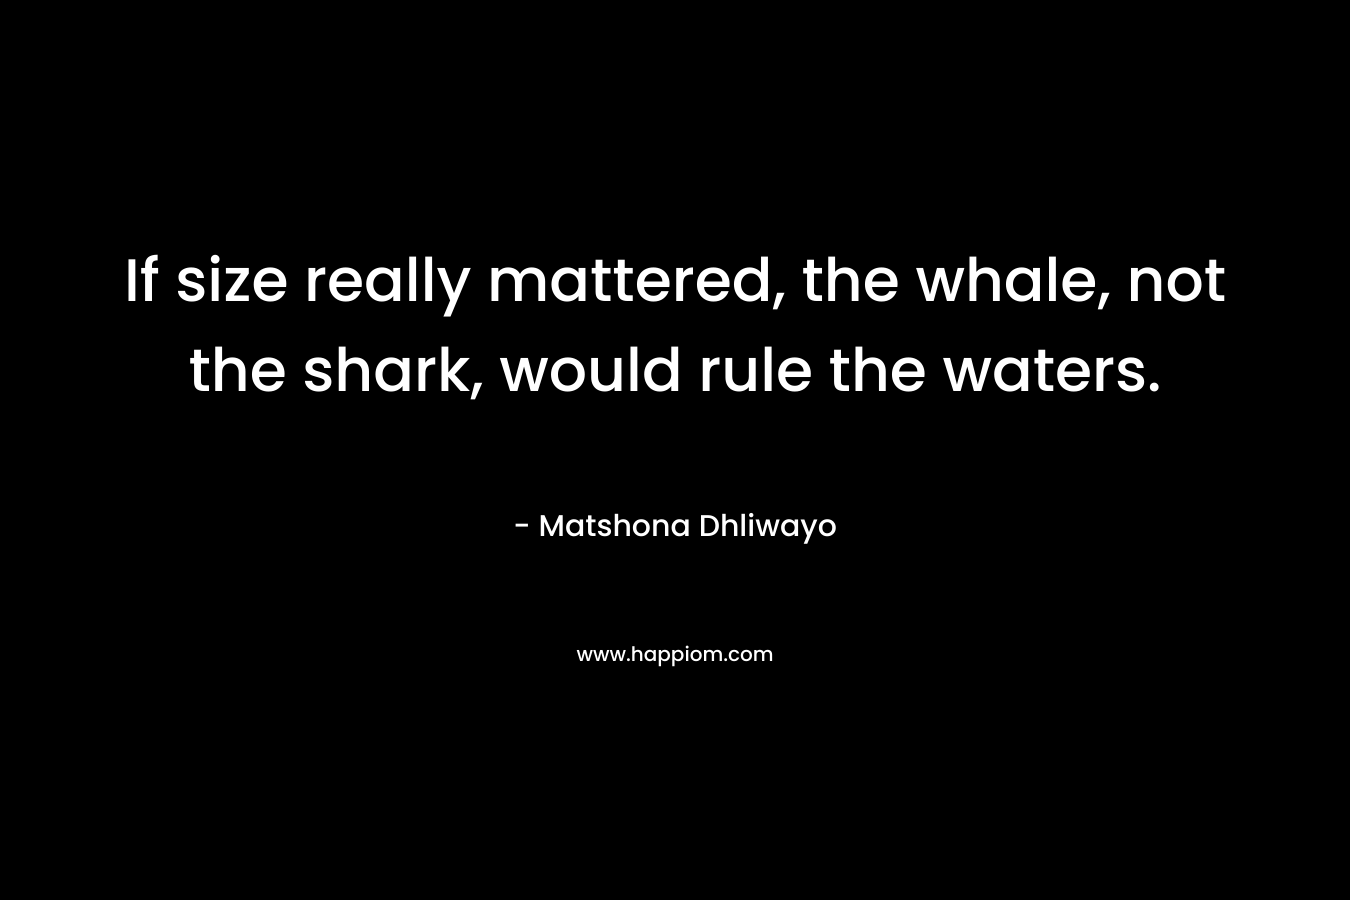 If size really mattered, the whale, not the shark, would rule the waters.